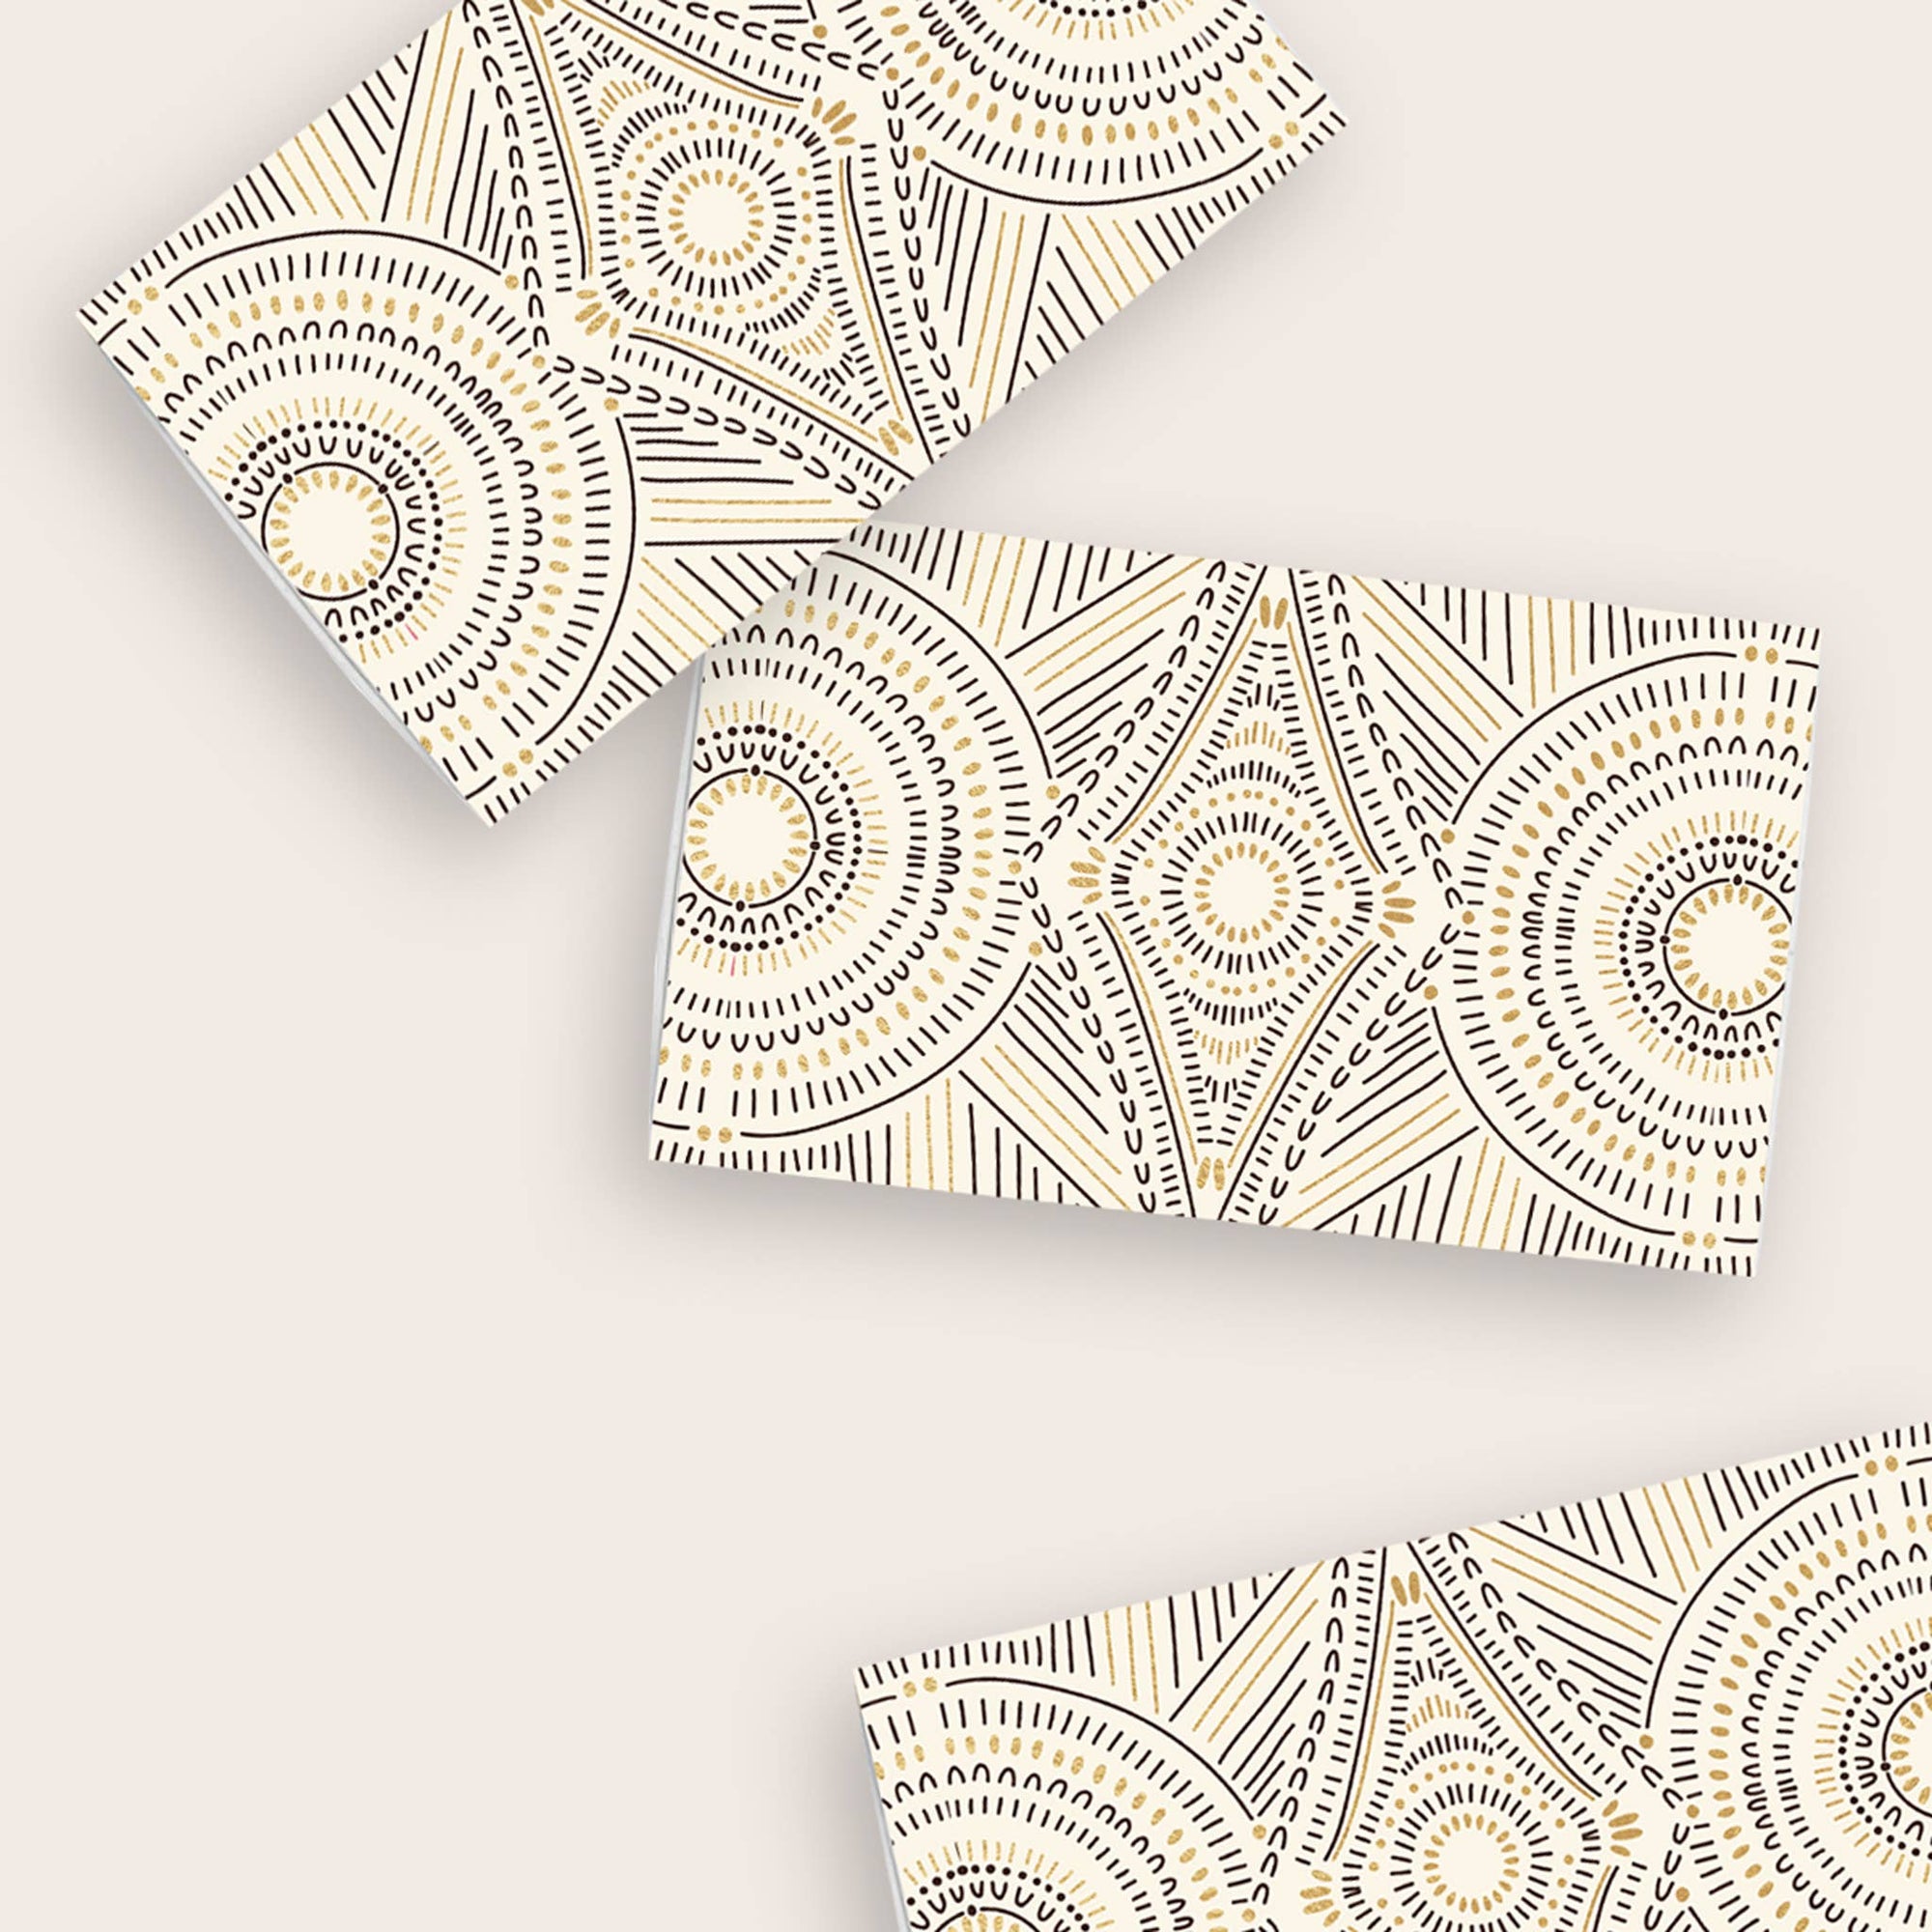 Pattern with Gold Accents Matches